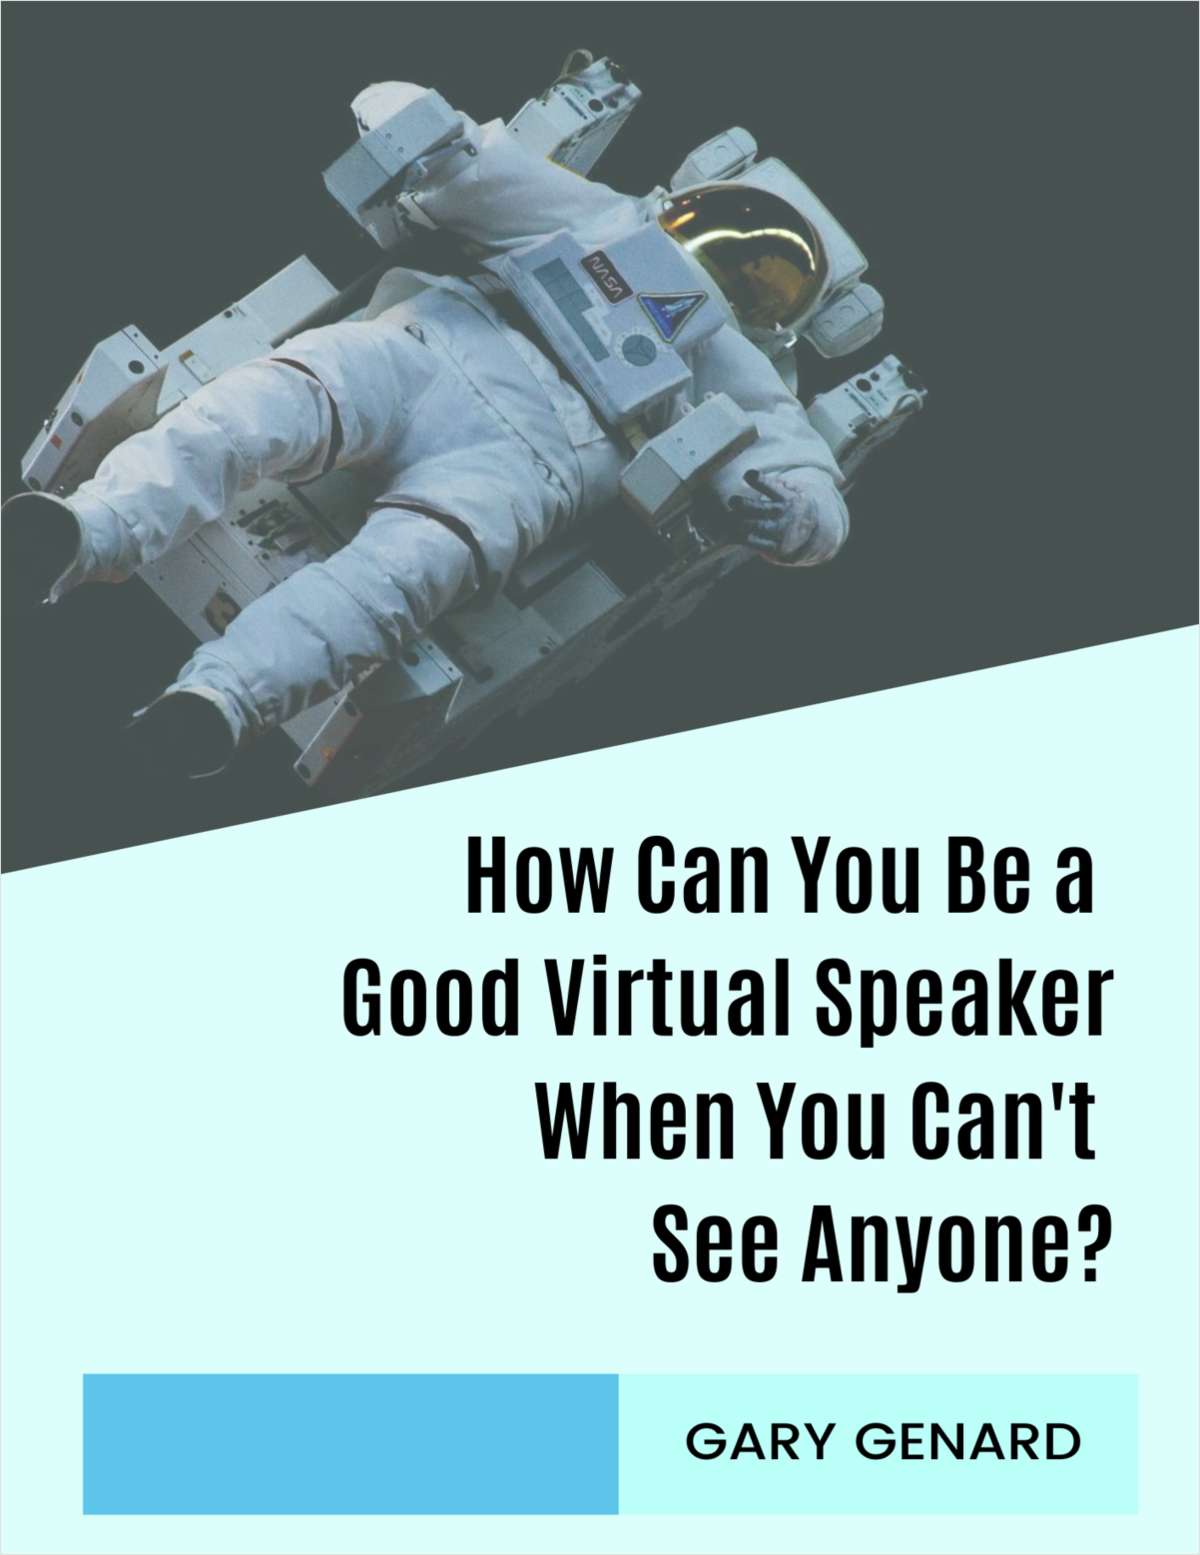 How Can You Be a Good Virtual Speaker When You Can't See Anyone?